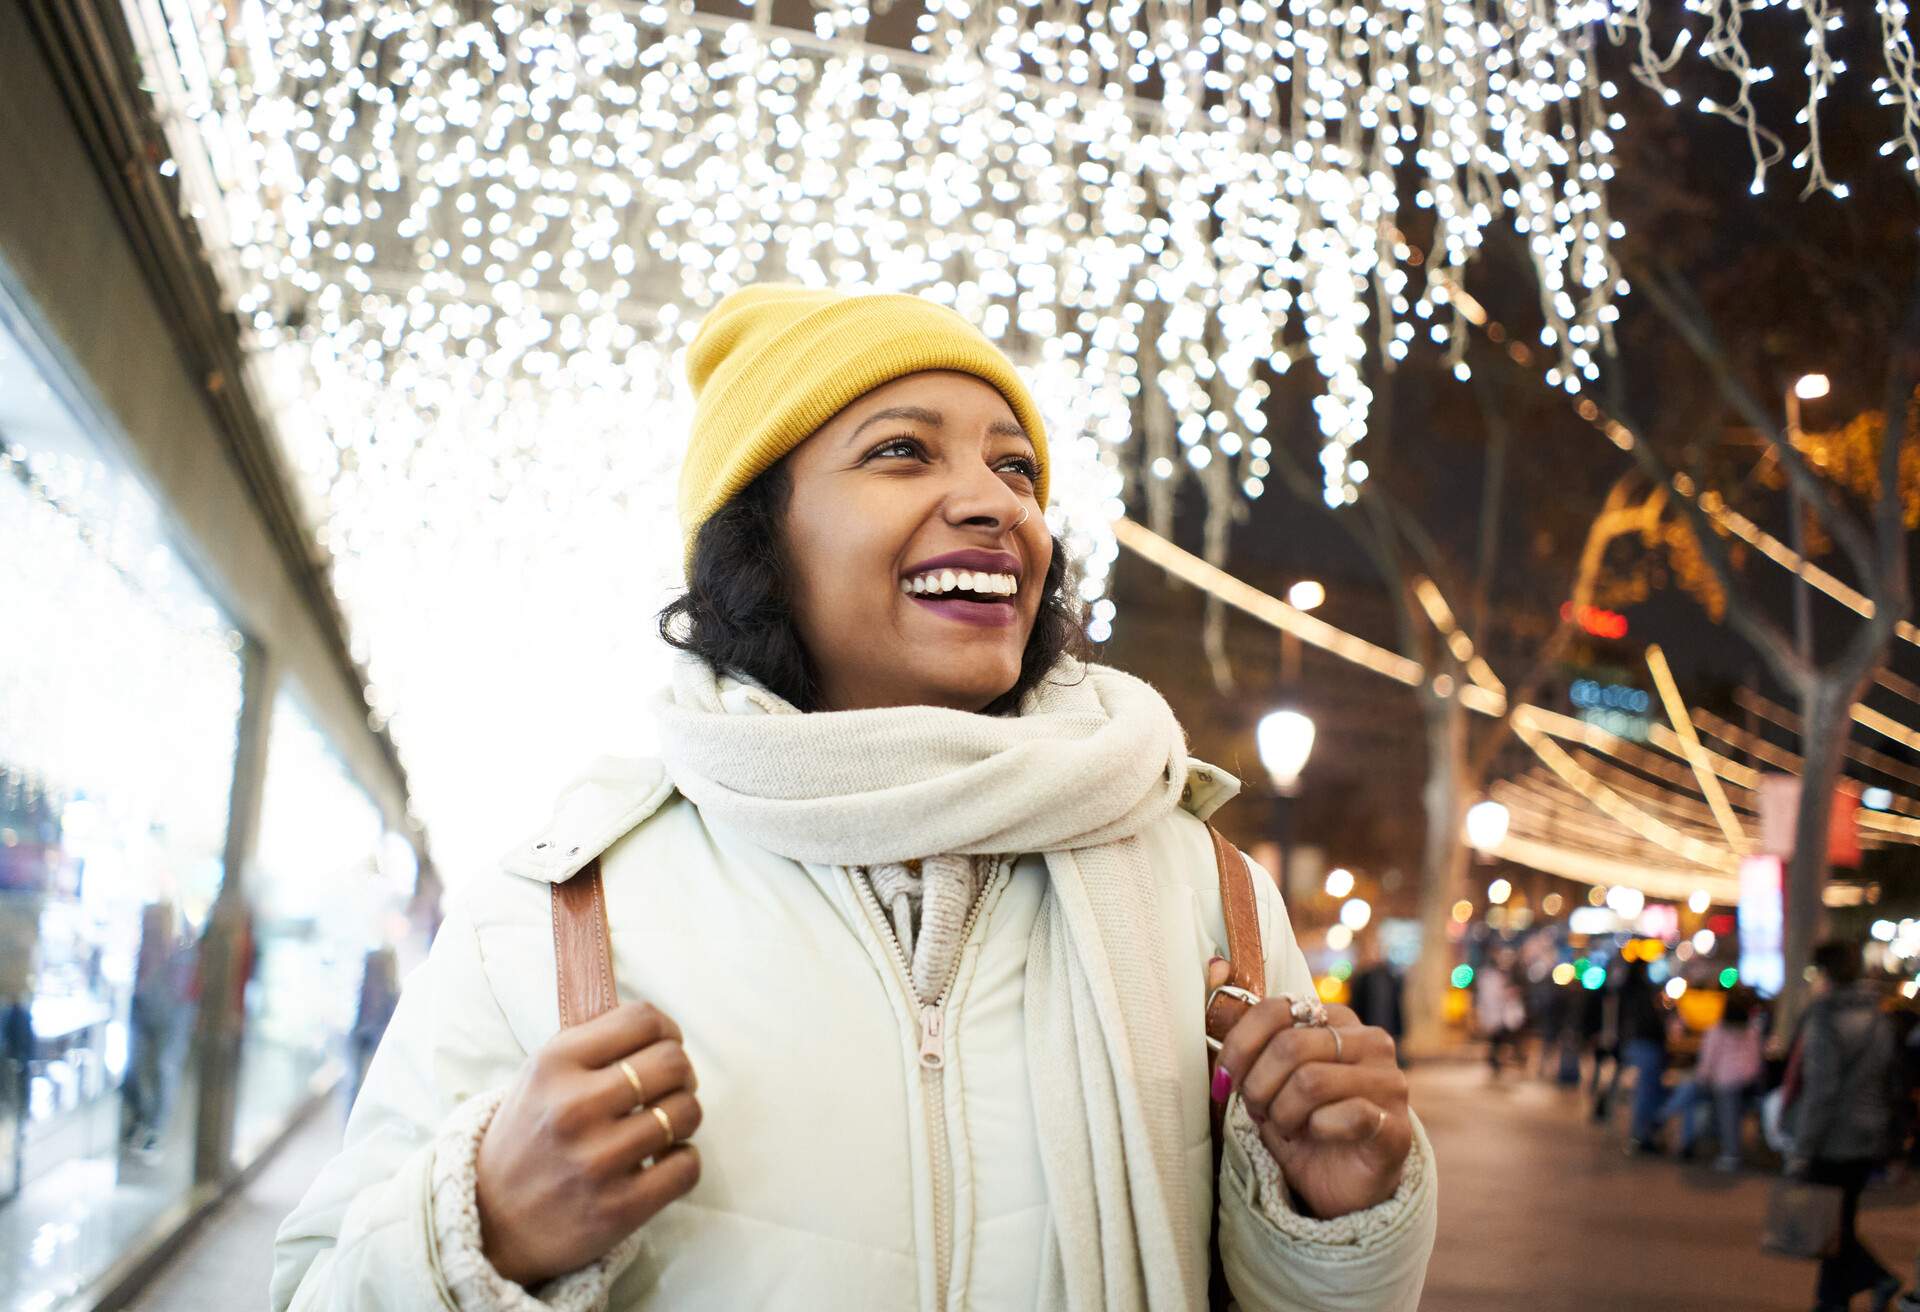 Cheerful African American young woman with big toothy smile standing by Christmas lights amazed by the view outdoors.